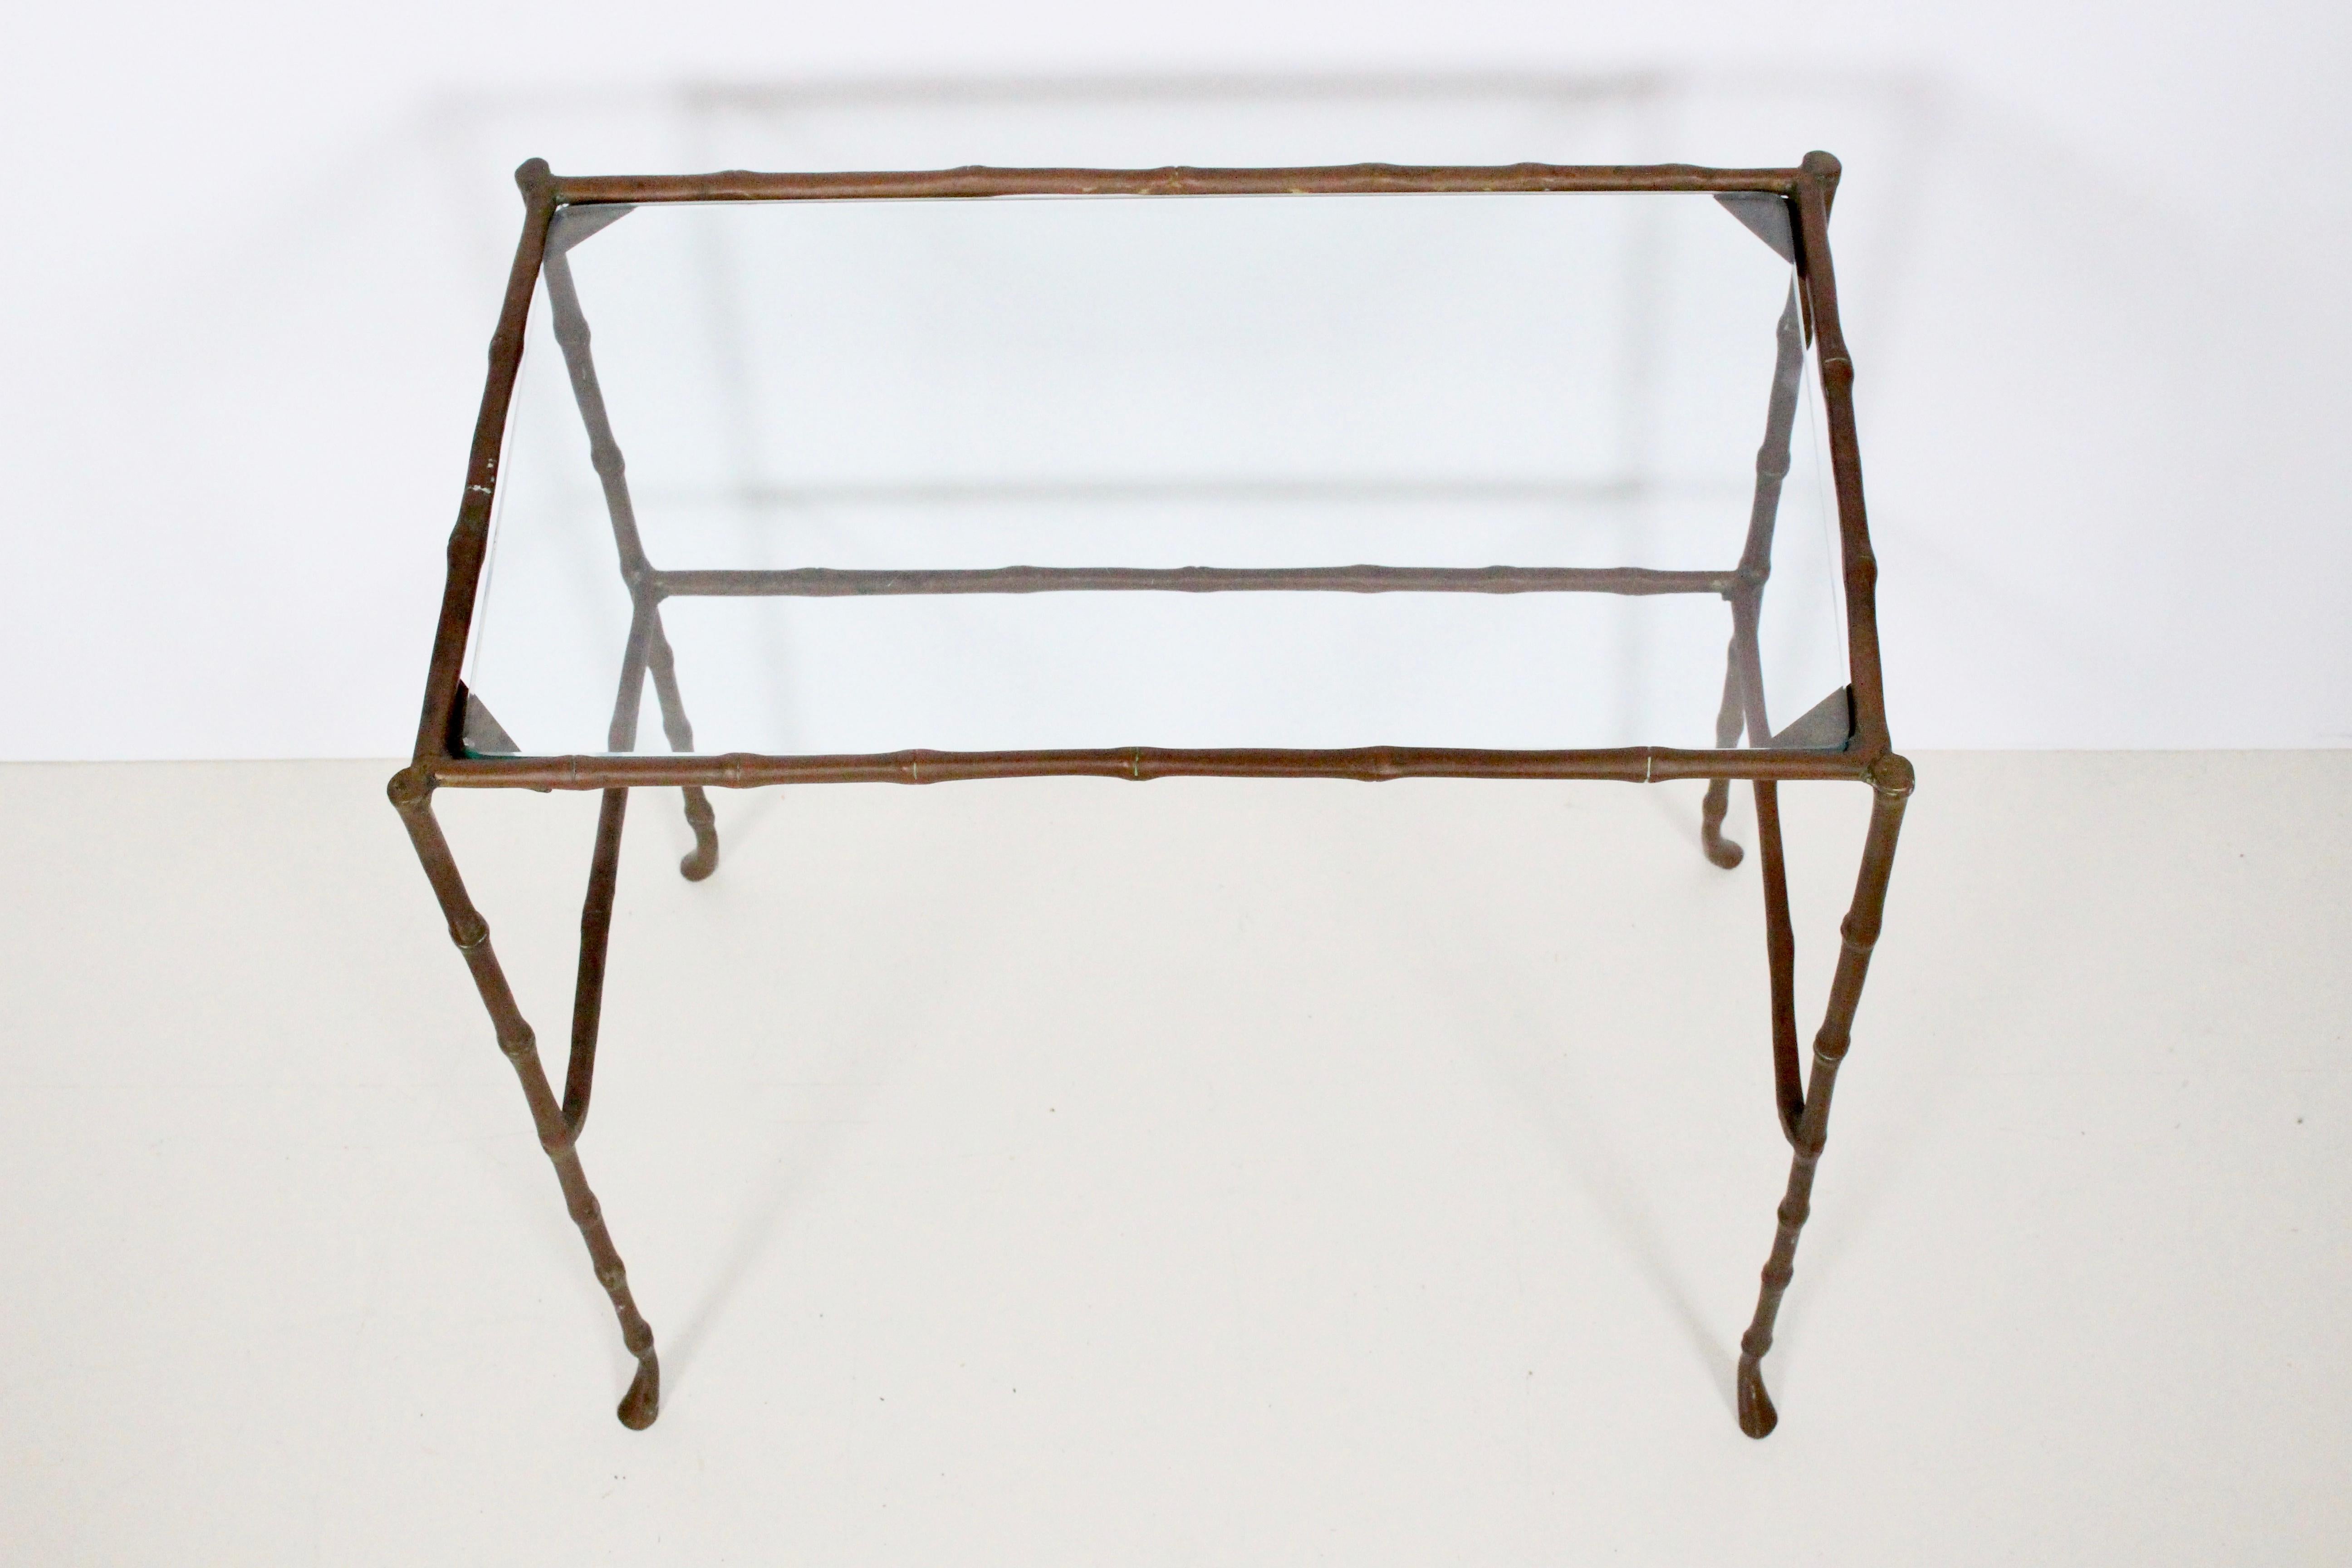 1950's Maison Jansen brass sofa table, side table, plant table. Featuring a sturdy rectangular form in solid Brass with original vintage patina and 1/4 glass. Great for small spaces. For indoor or outdoor use.
  